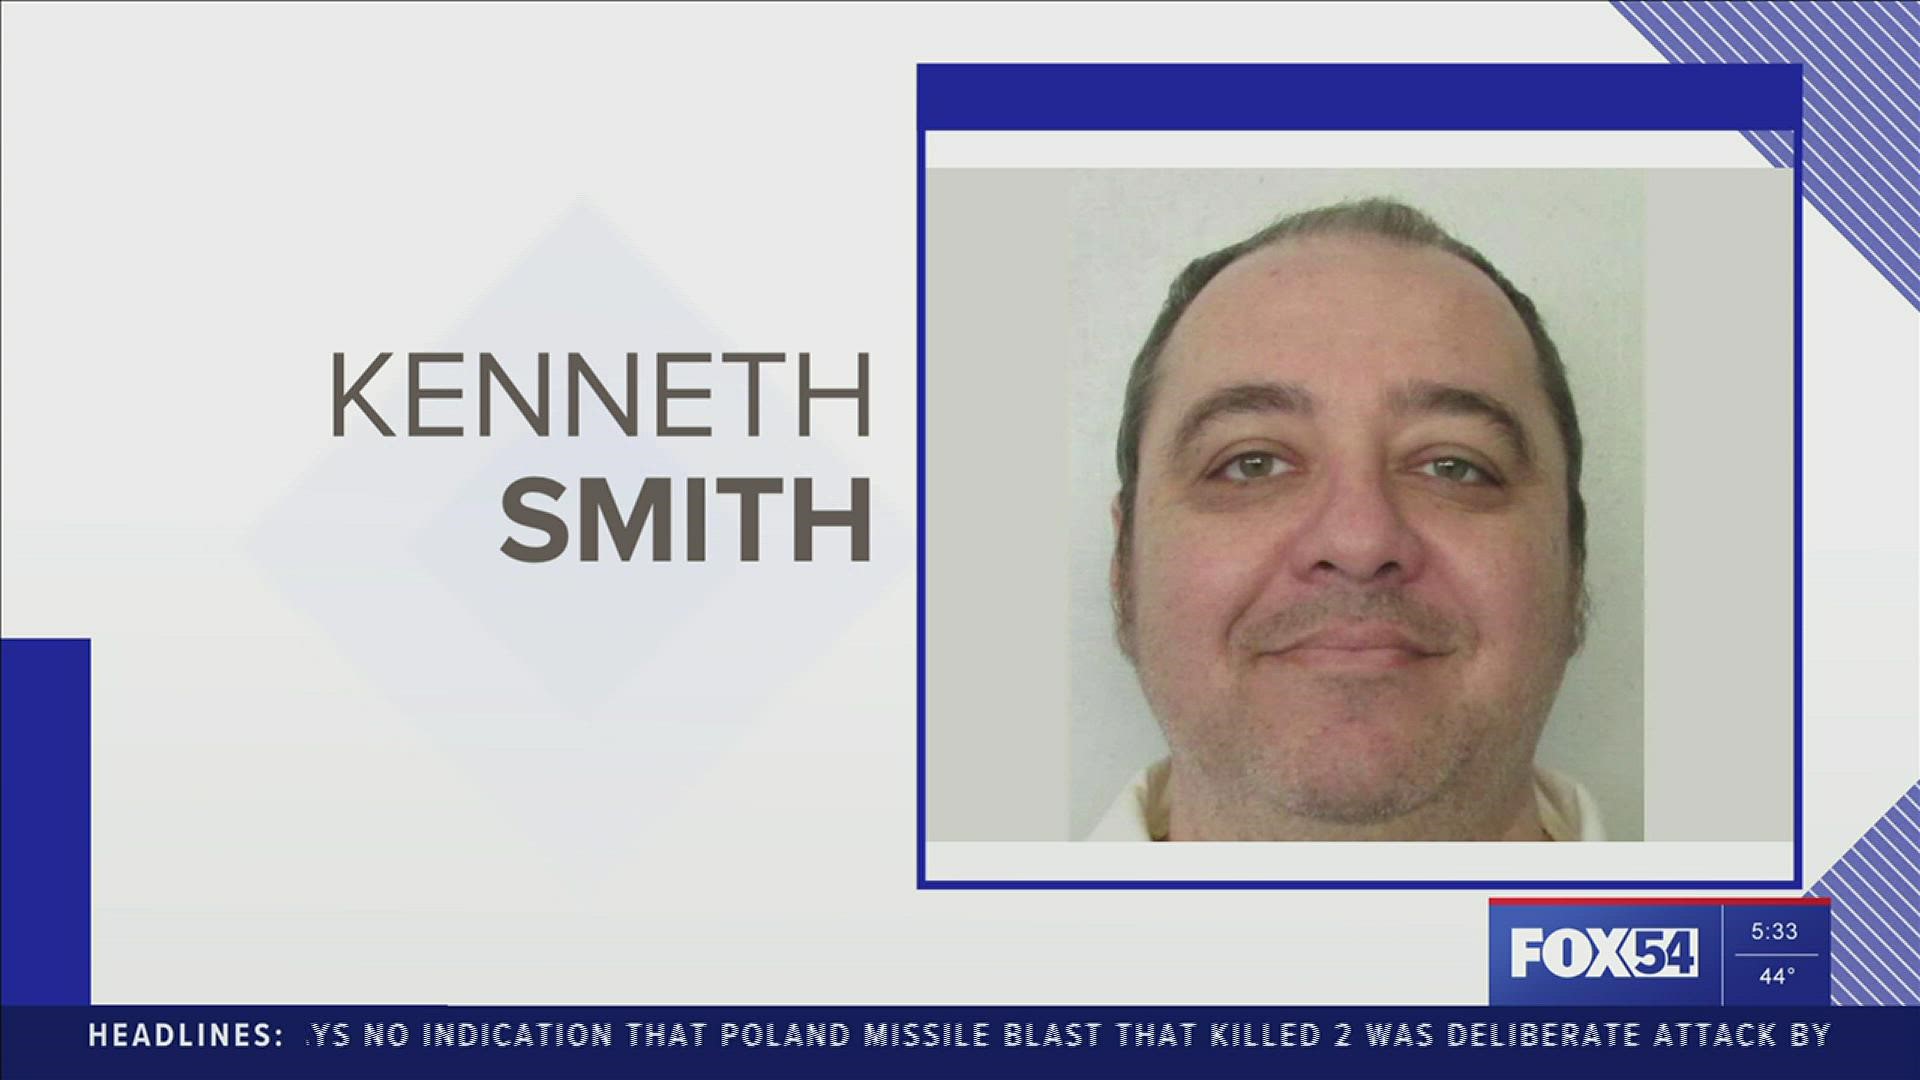 Tomorrow the state is set to execute a man convicted in a murder-for-hire in 1988.